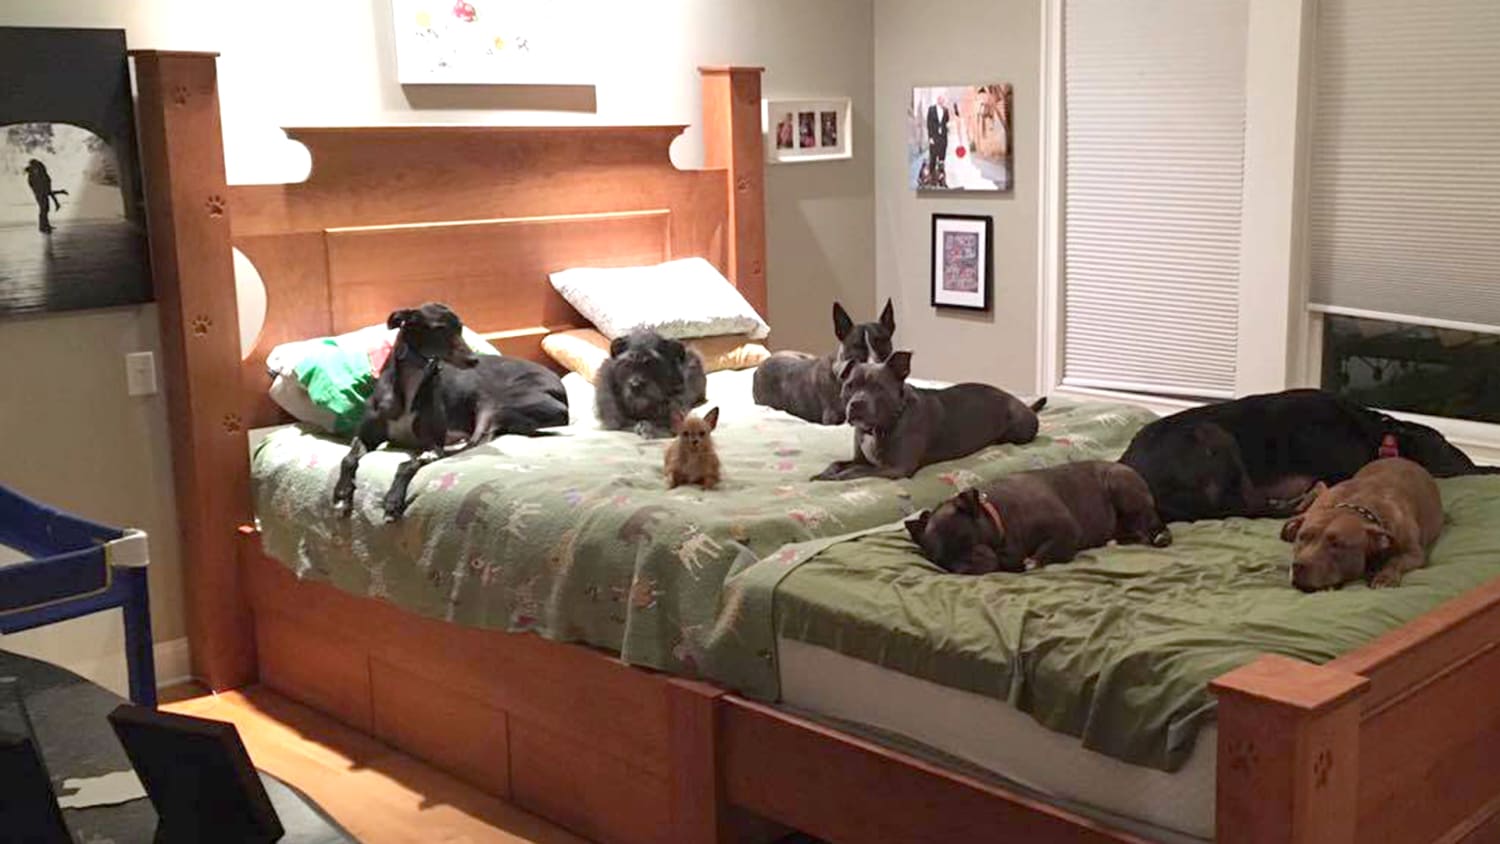 Giant Bed To Sleep Comfortably With 8 Dogs, King Bed With Dog Insert